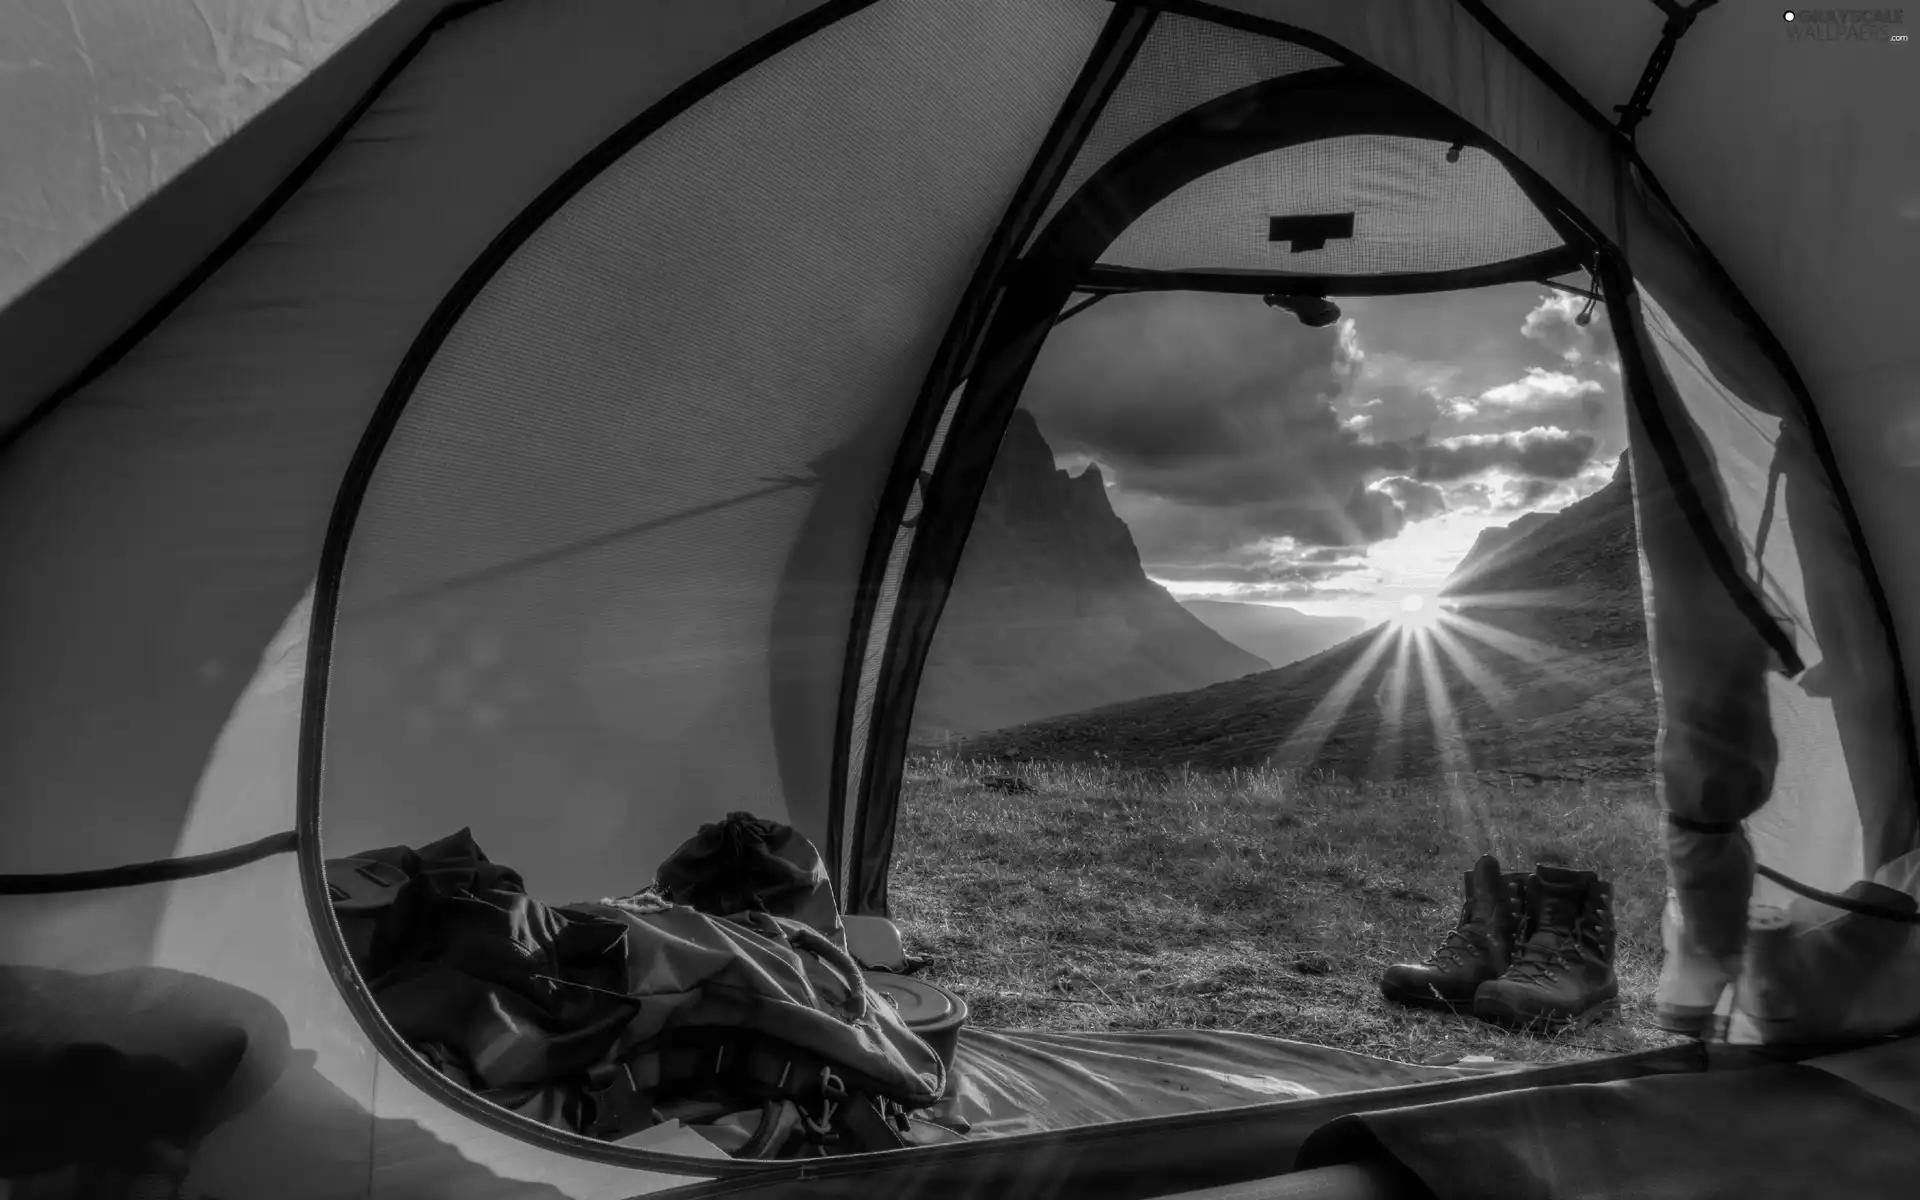 Mountains, View, sun, an, Tent, rays, clouds